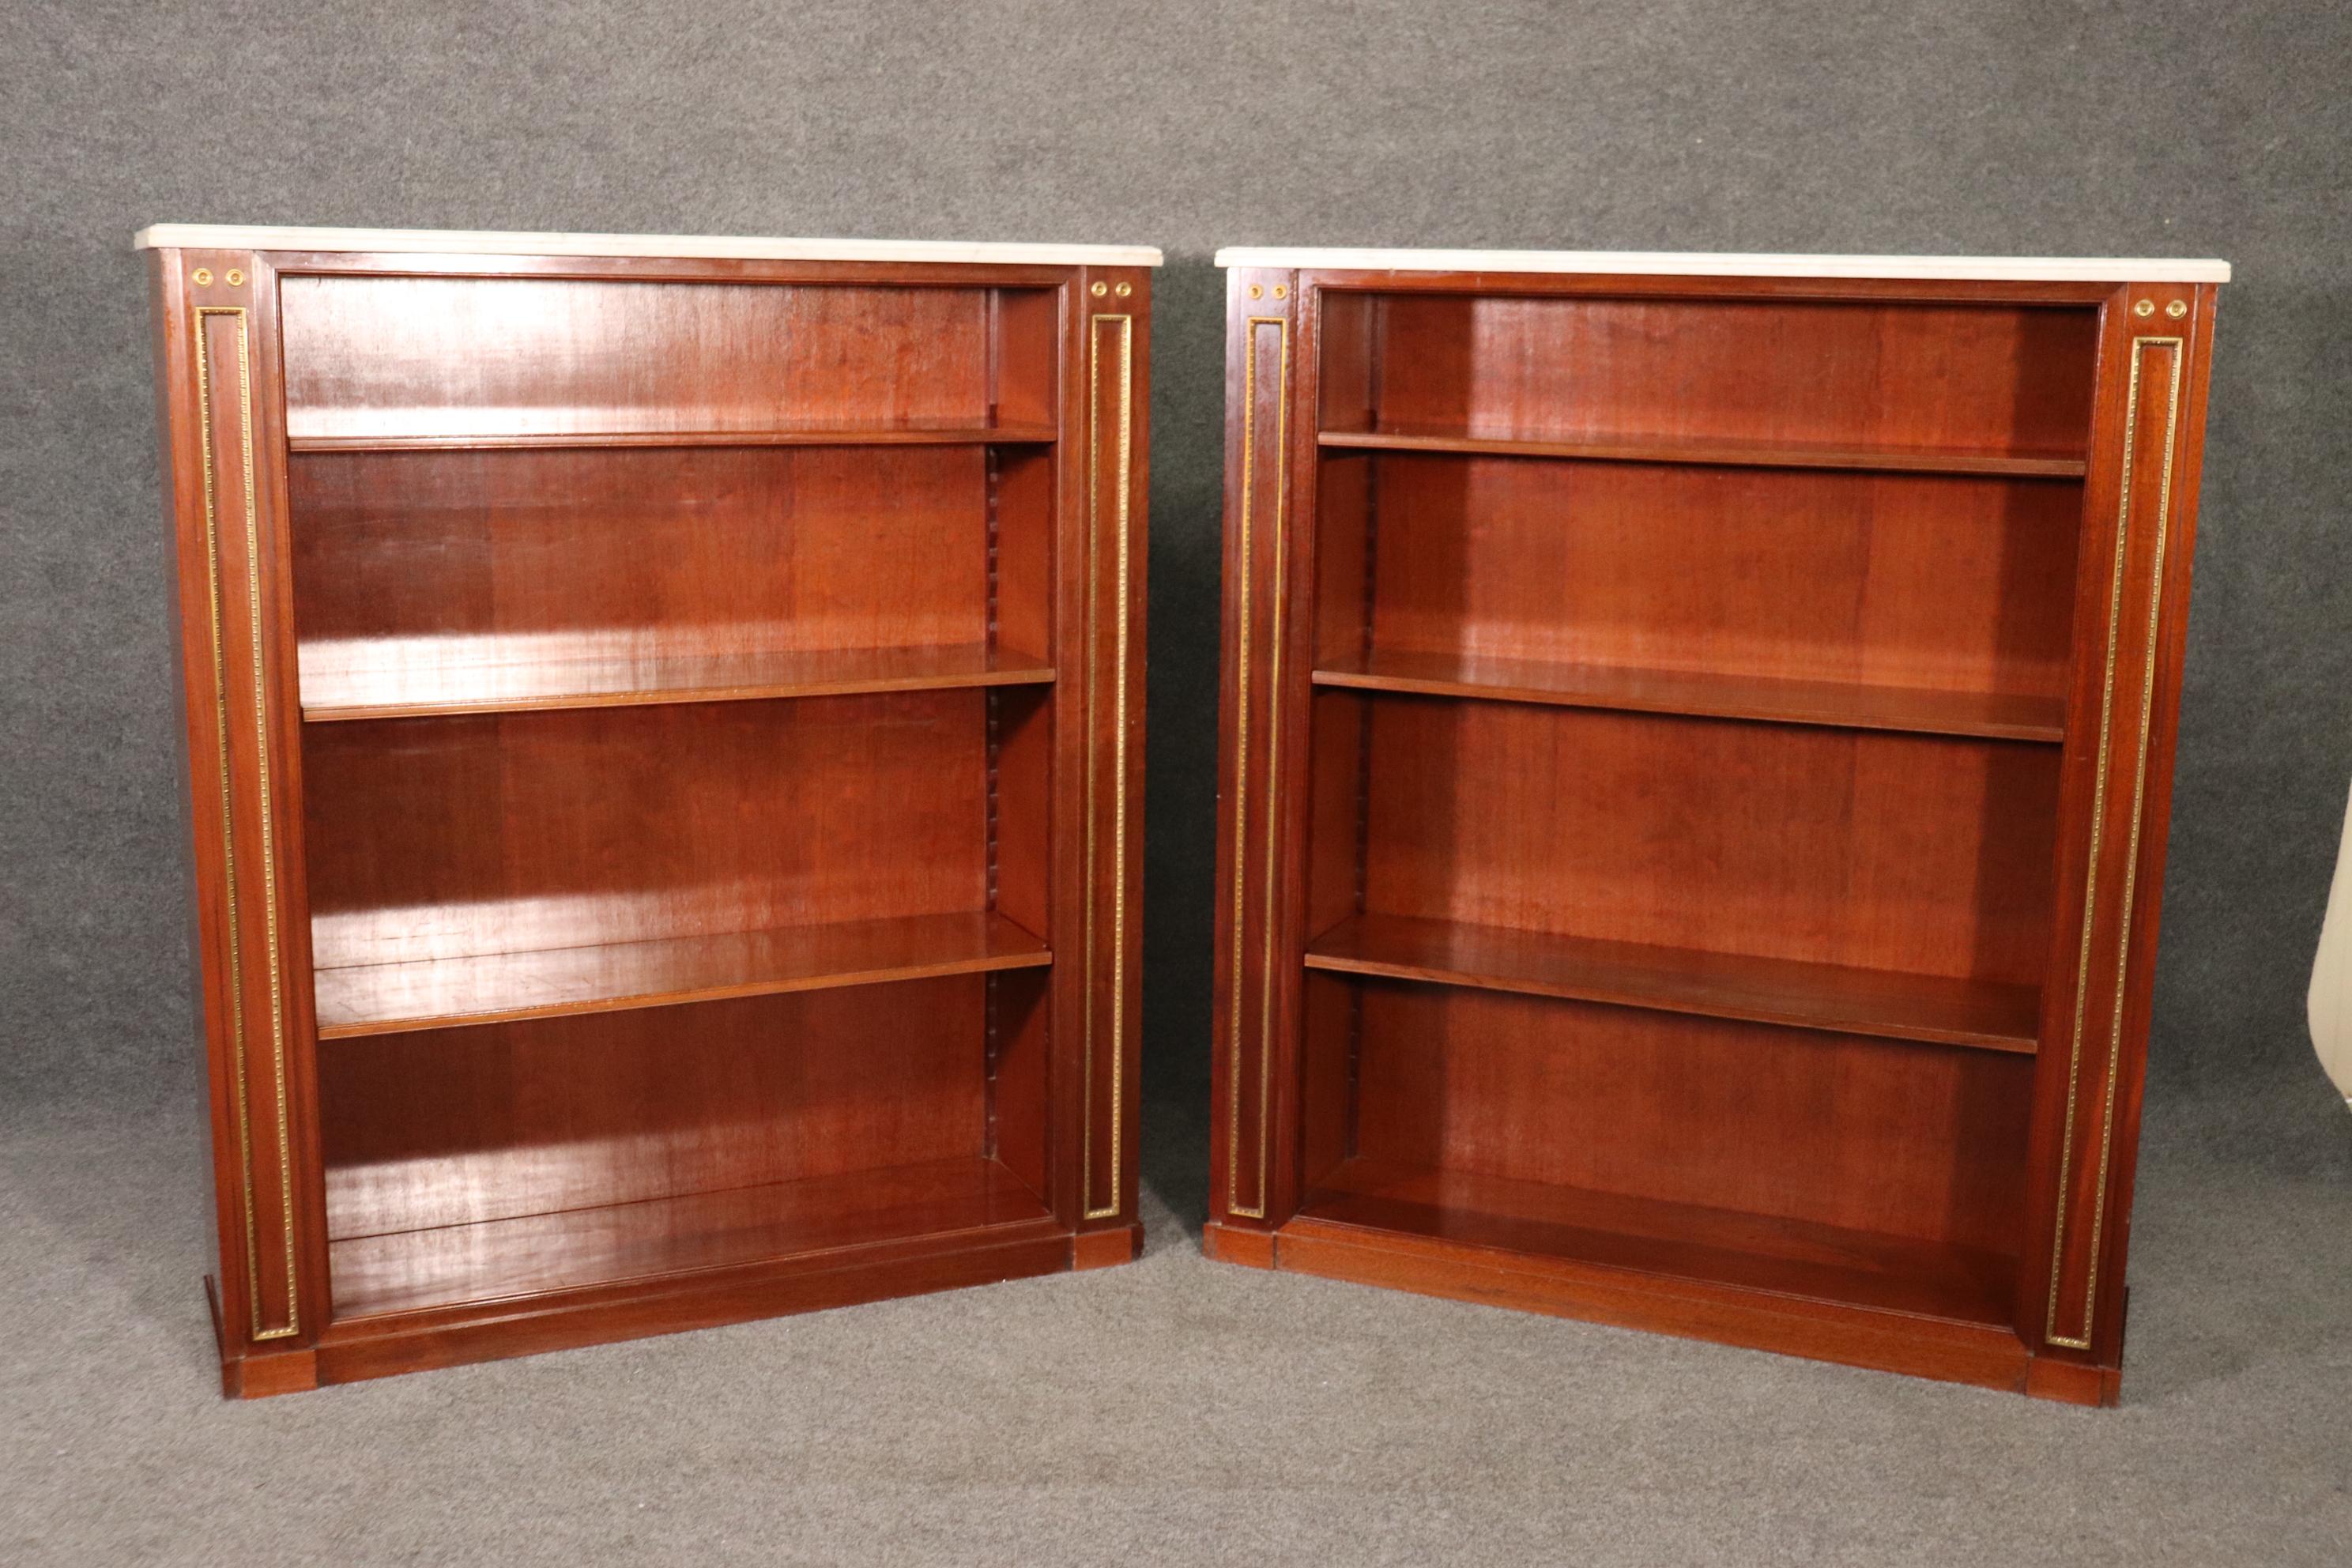 Maison Jansen made some of the world's most chic furniture and designed to replicate the earlier styles of the past and blend them with a more practical design for today. These bookcases measure 45 wide x 11.5 deep x 51 tall. They date to the 1950s